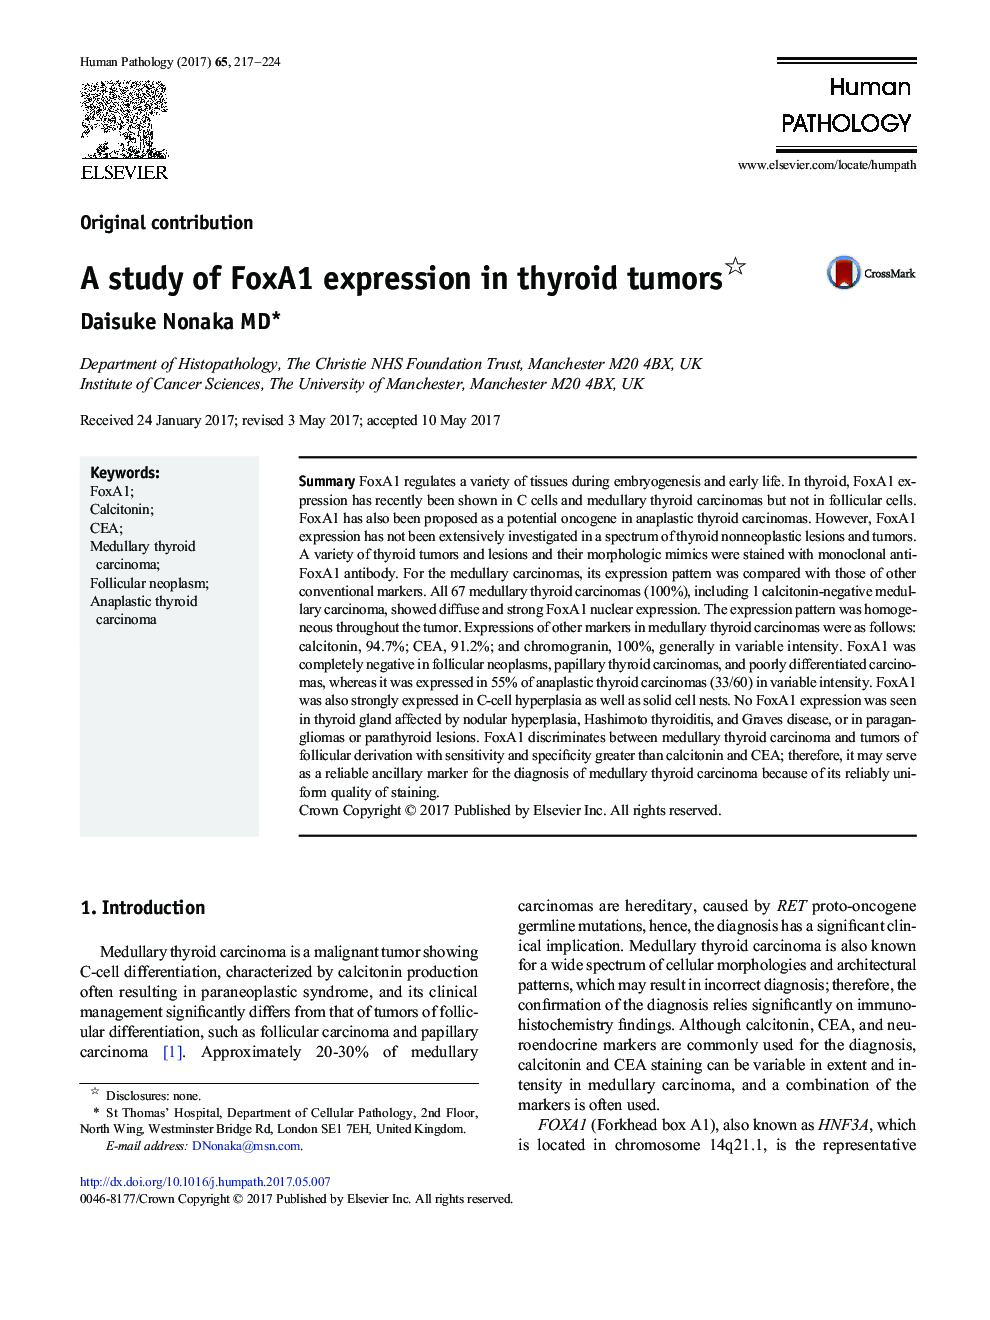 Original contributionA study of FoxA1 expression in thyroid tumors